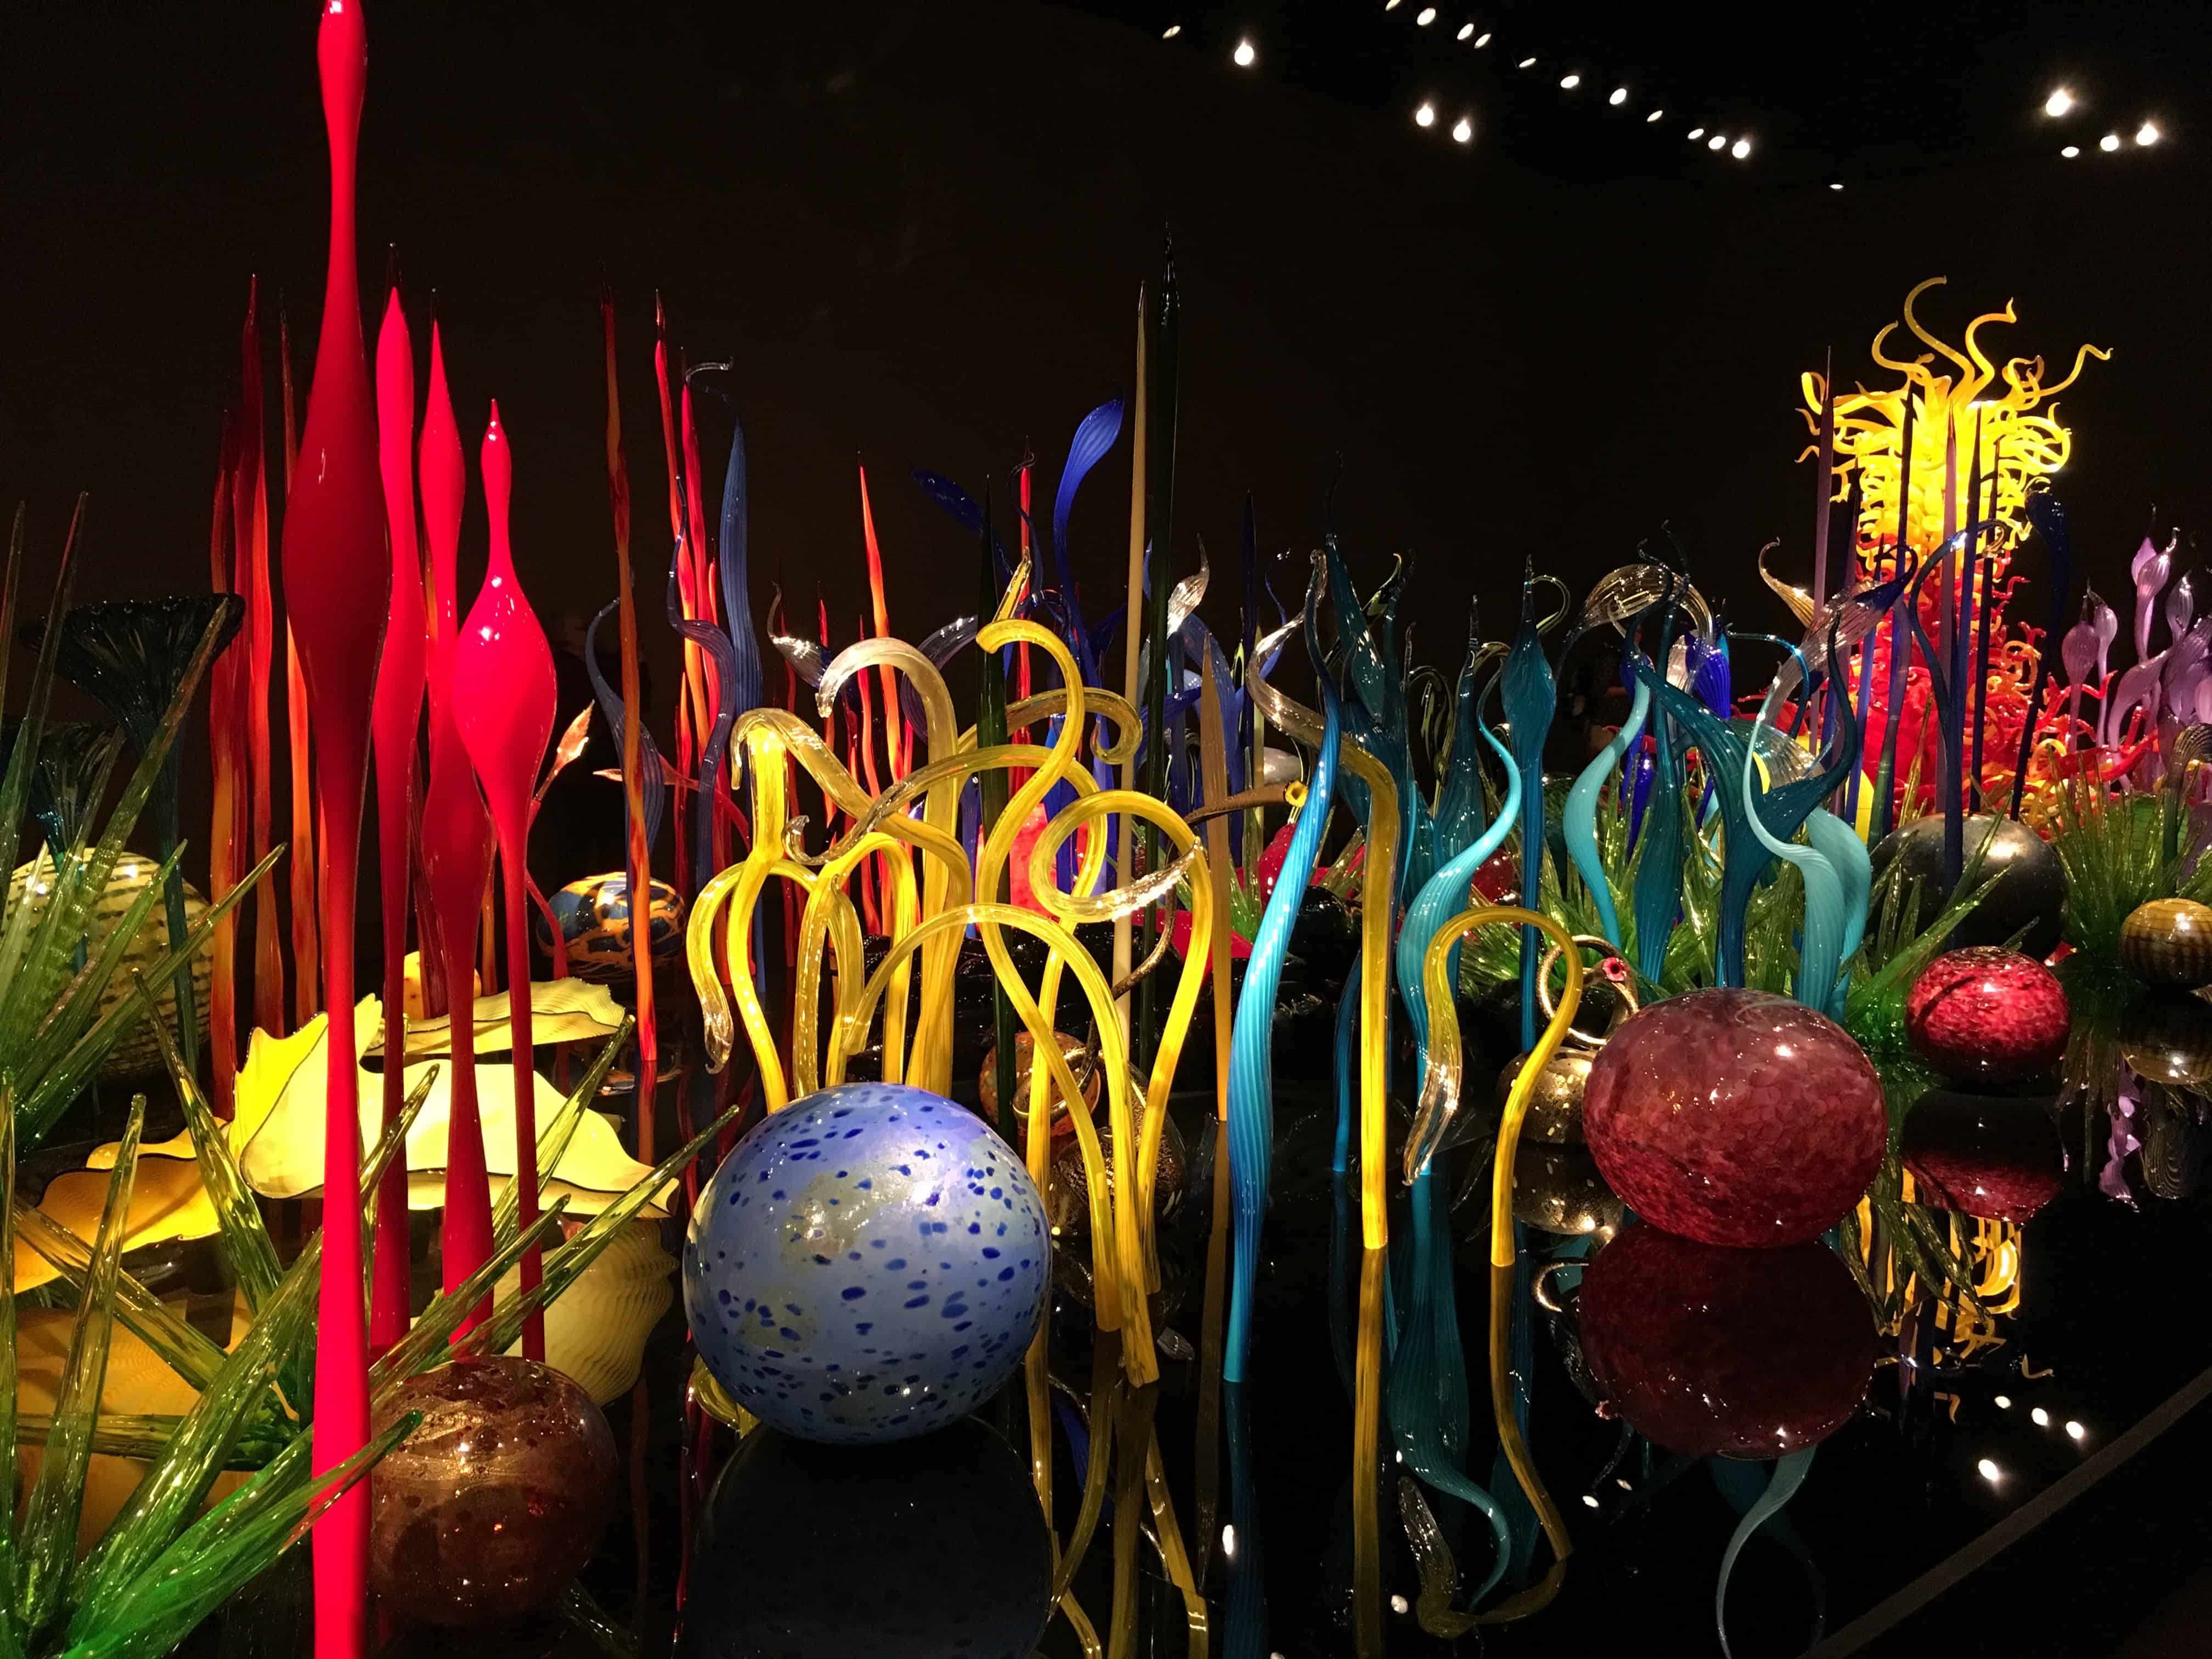 One of the colorful exhibits at Chihuly Garden and Glass in Seattle, Washington